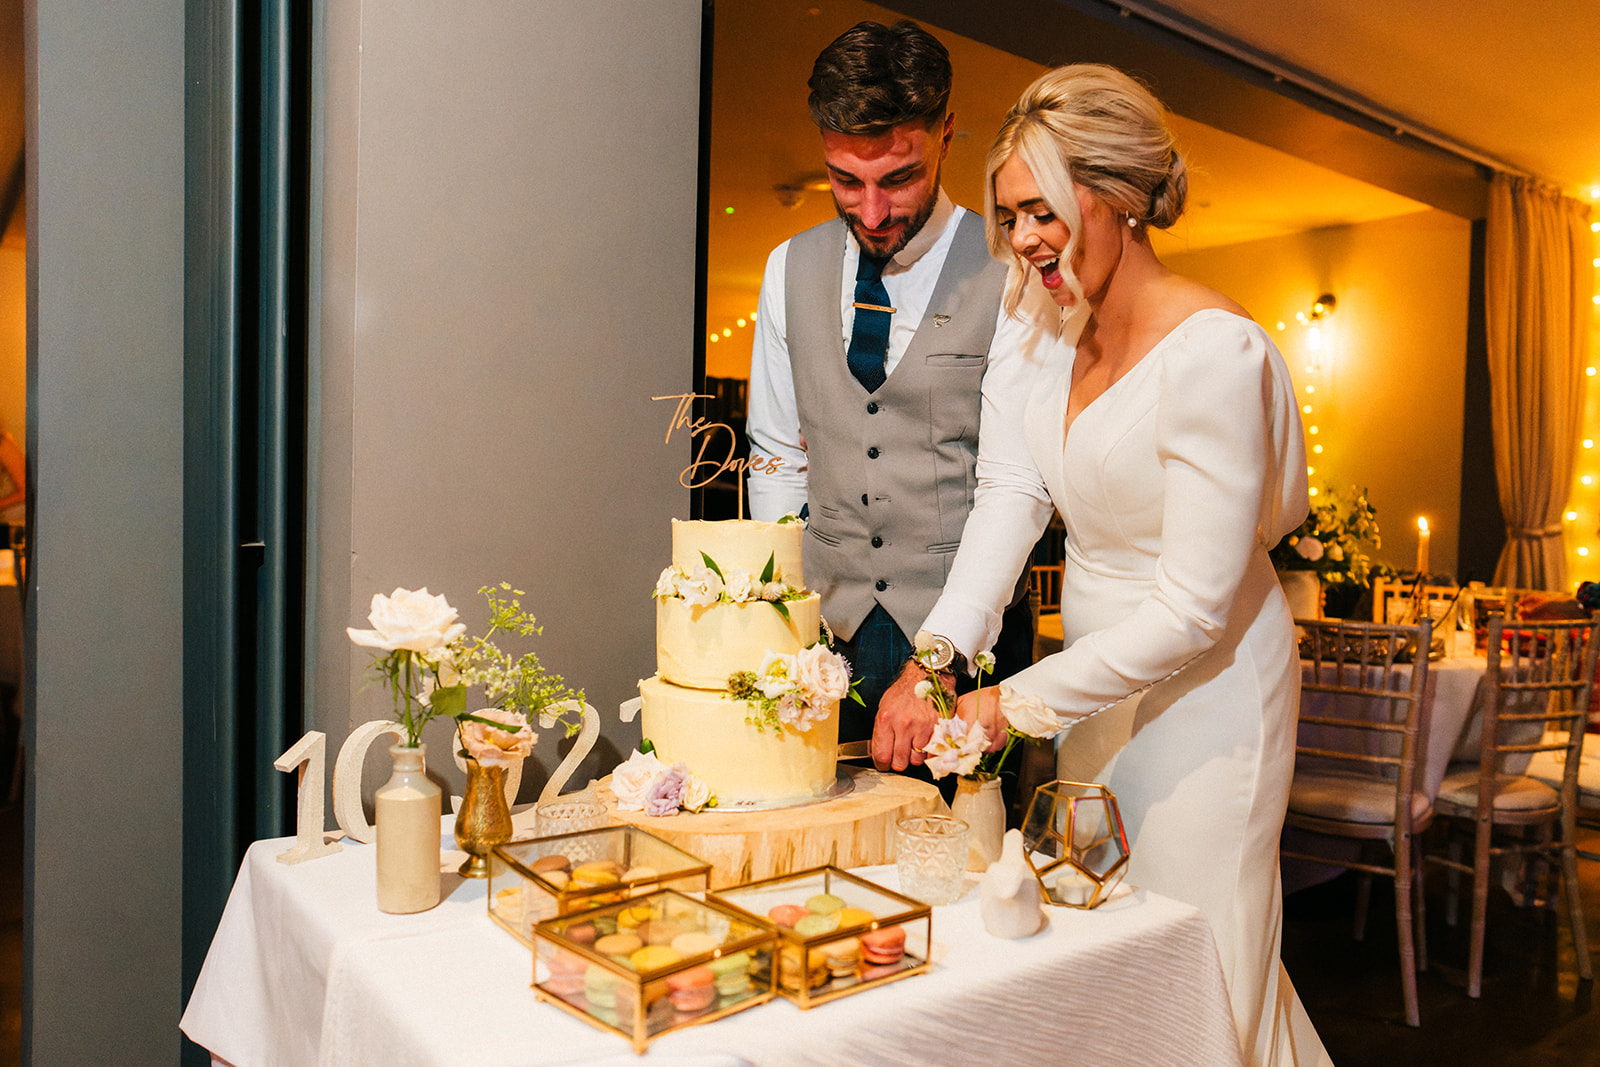 The Chequers Inn Wedding Photography - the bride and groom cut the wedding cake